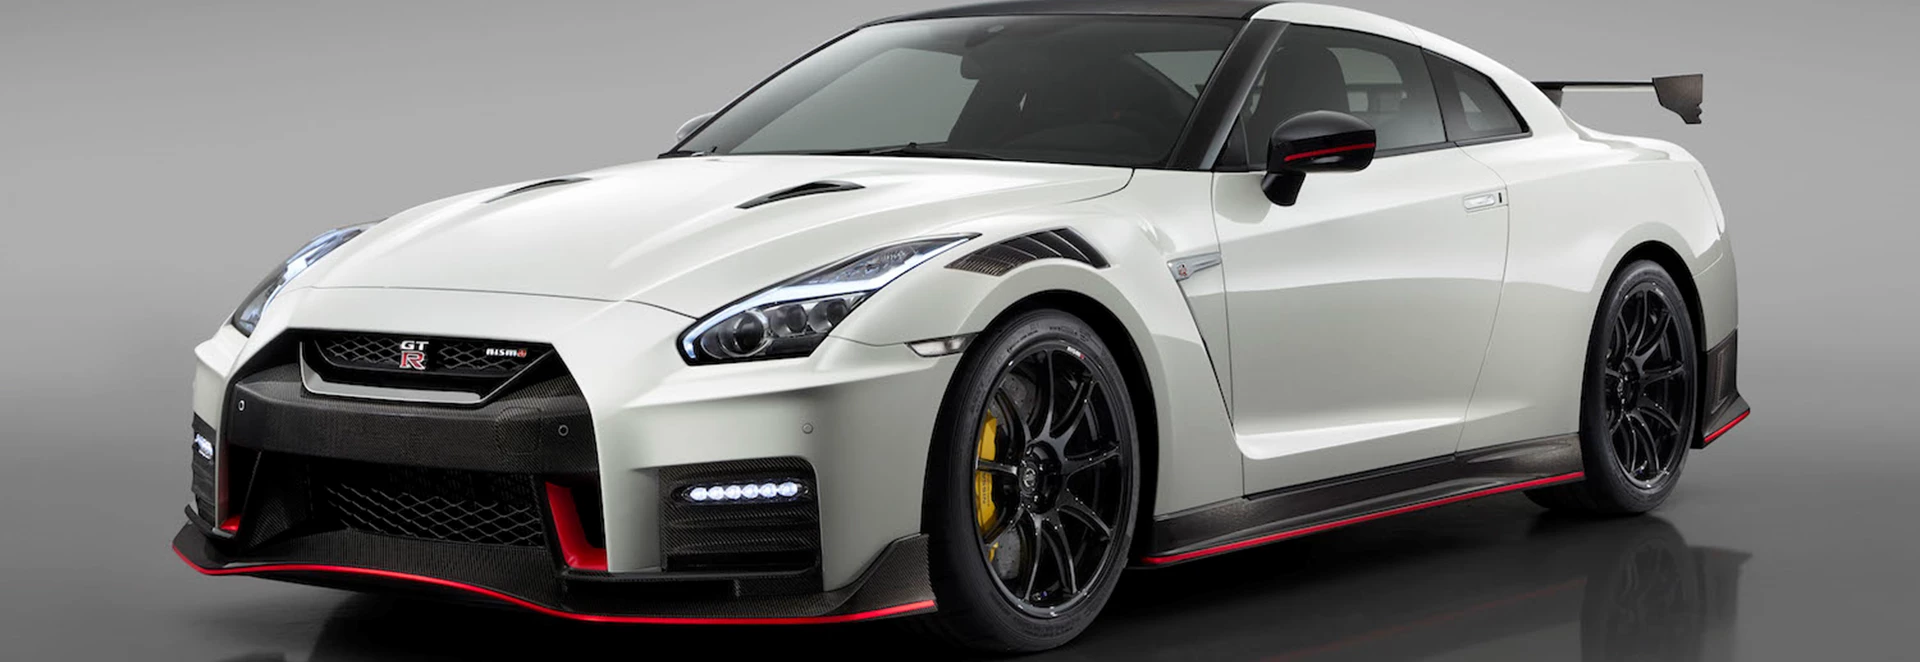 2020 Nissan GT-R Nismo revealed